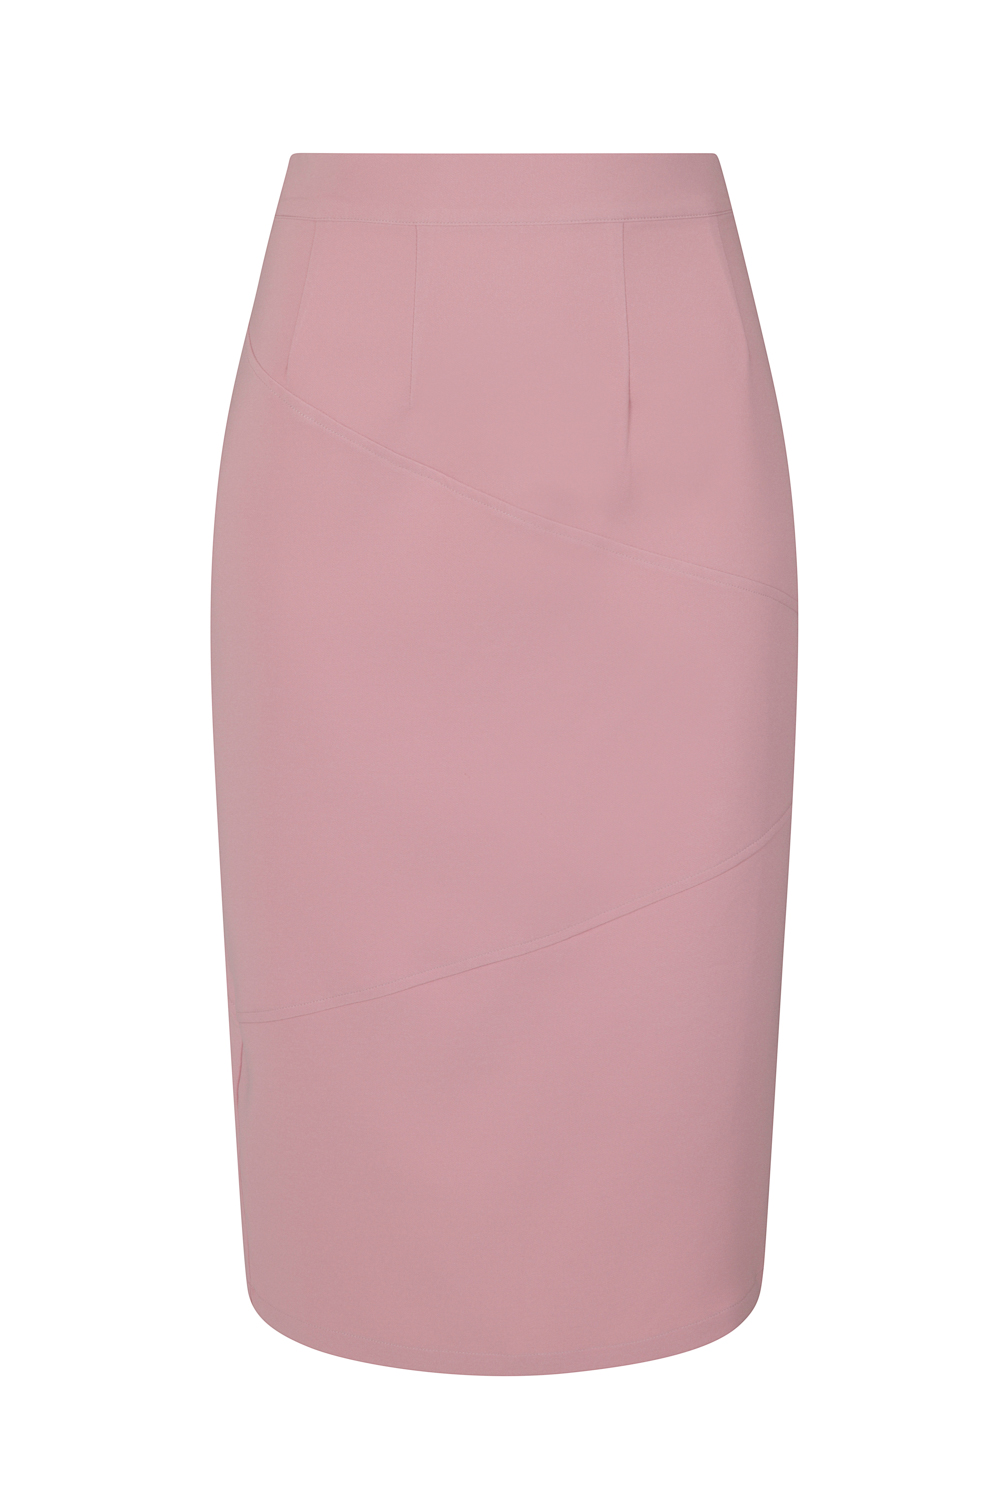 The Willow Wiggle Skirt - Hearts & Roses London